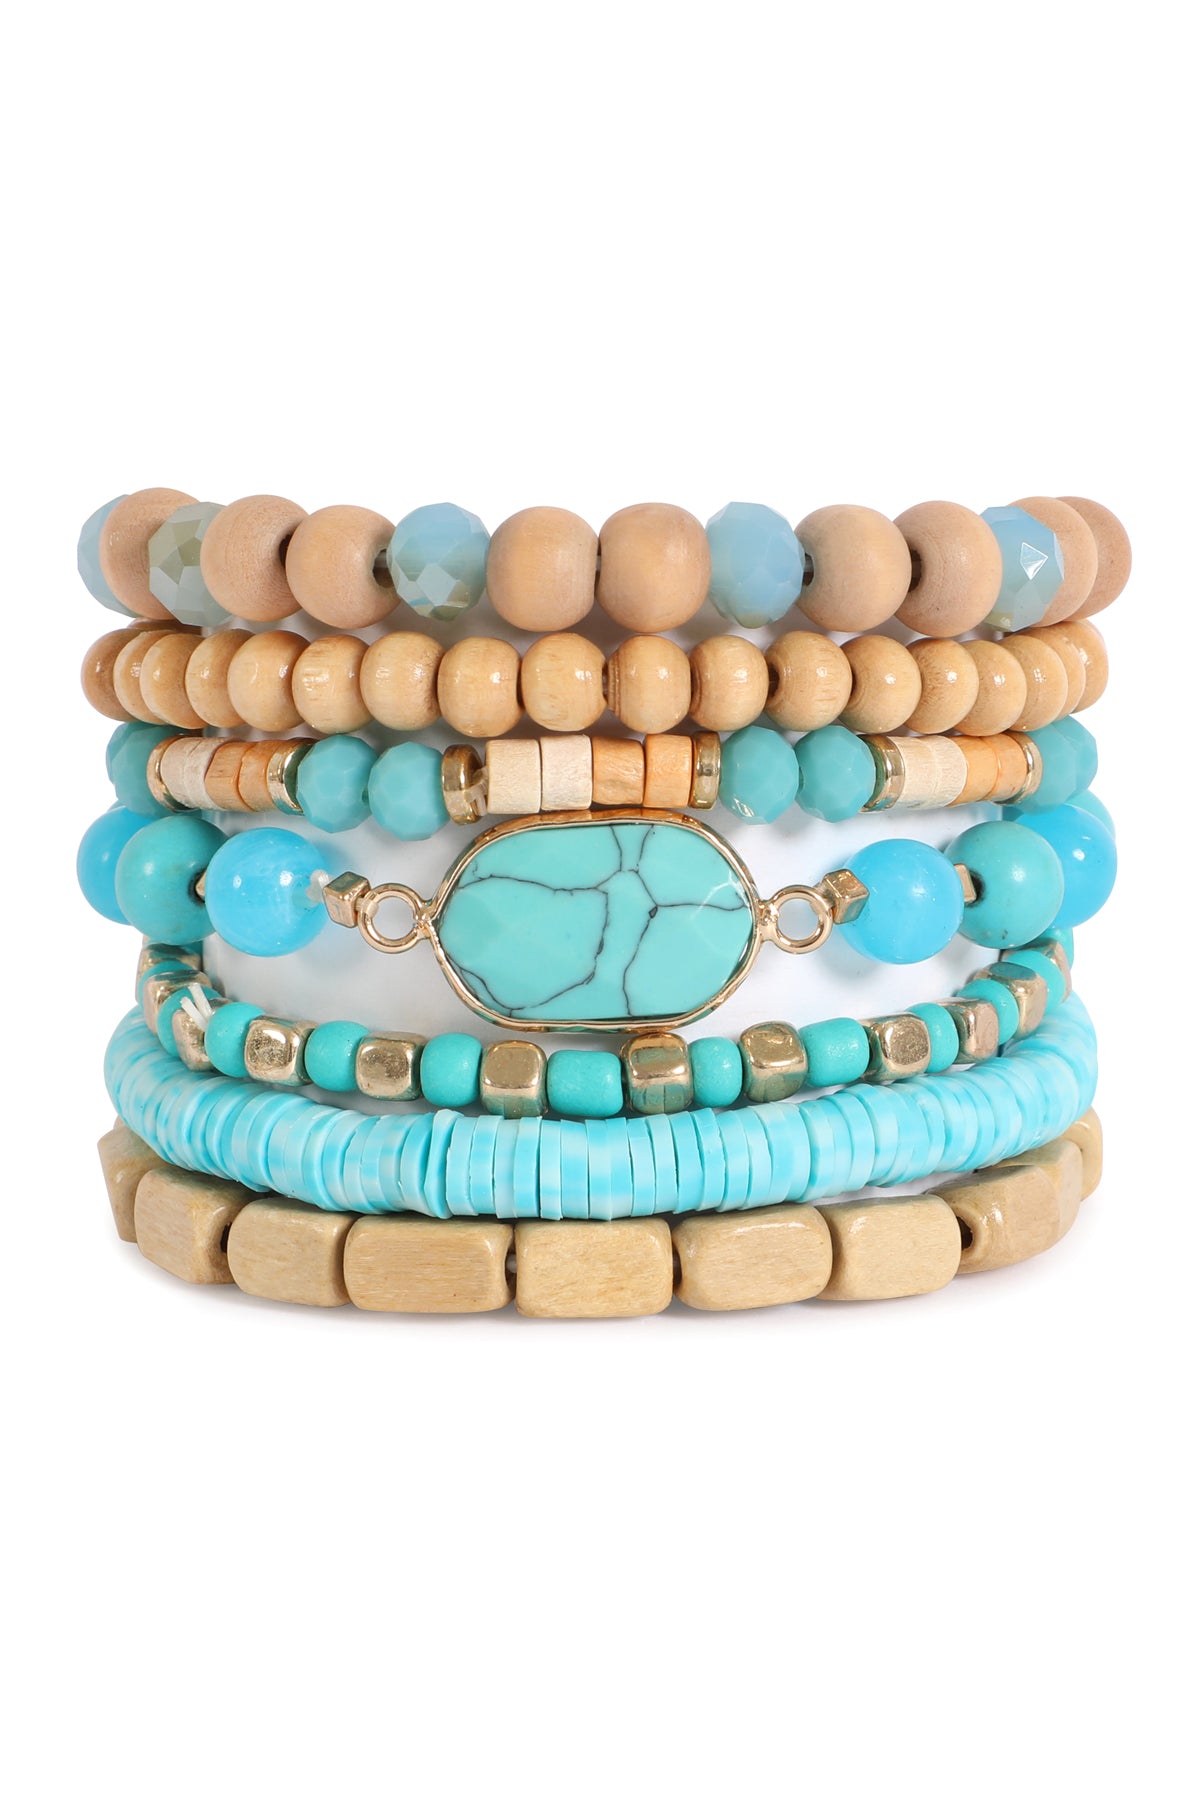 CHARM LAYERED WOOD, FIMO, RONDELLE MIX BEADS STACKABLE BRACELET